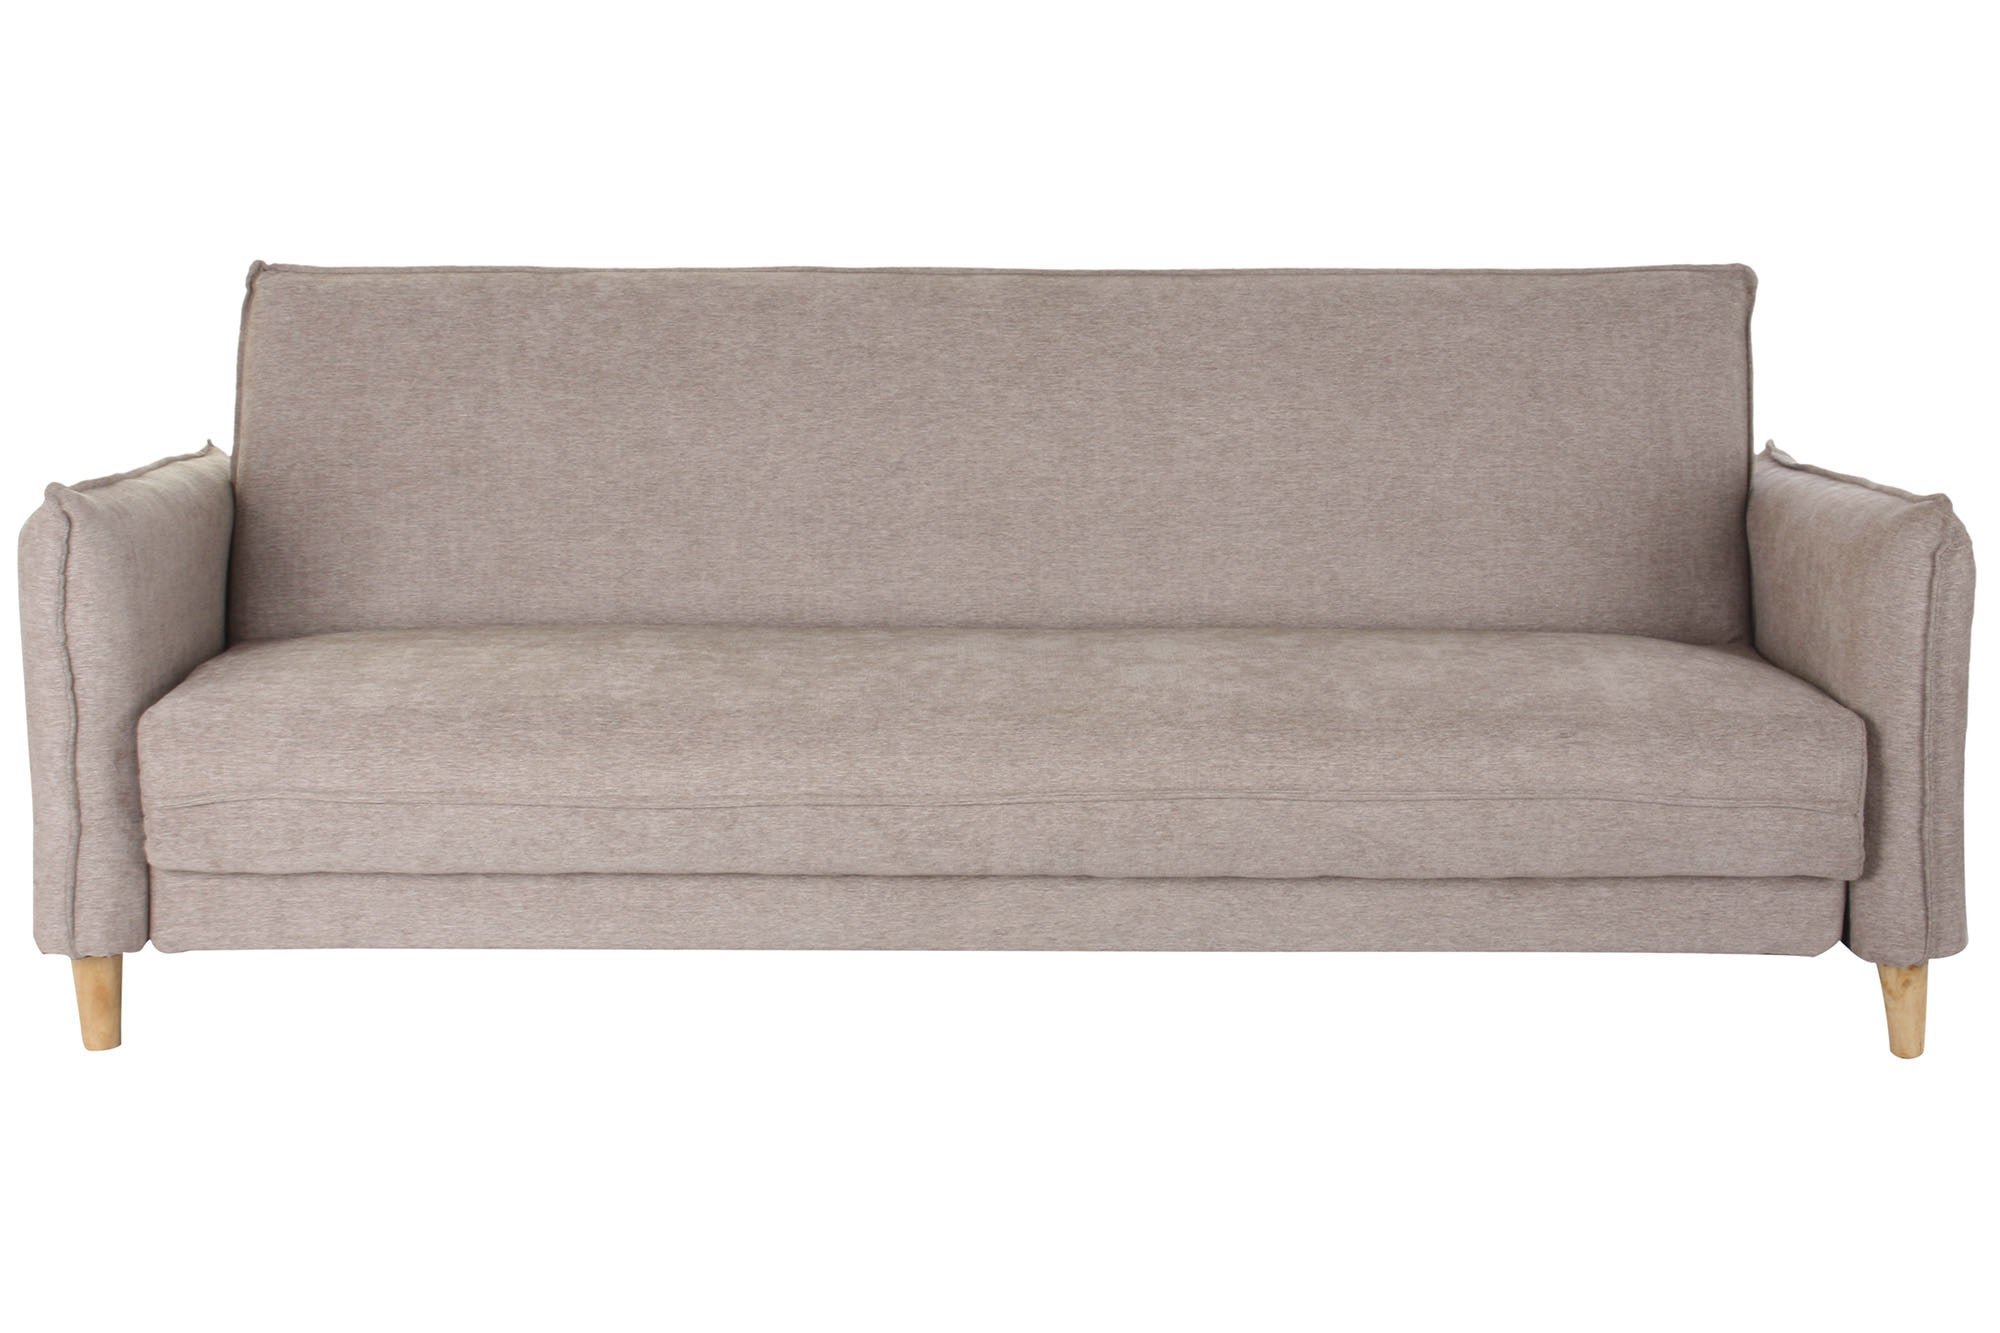 Convertible Sofa Traditional Design Home Decor Beige and Wood (206 x 85 x 82 cm) 